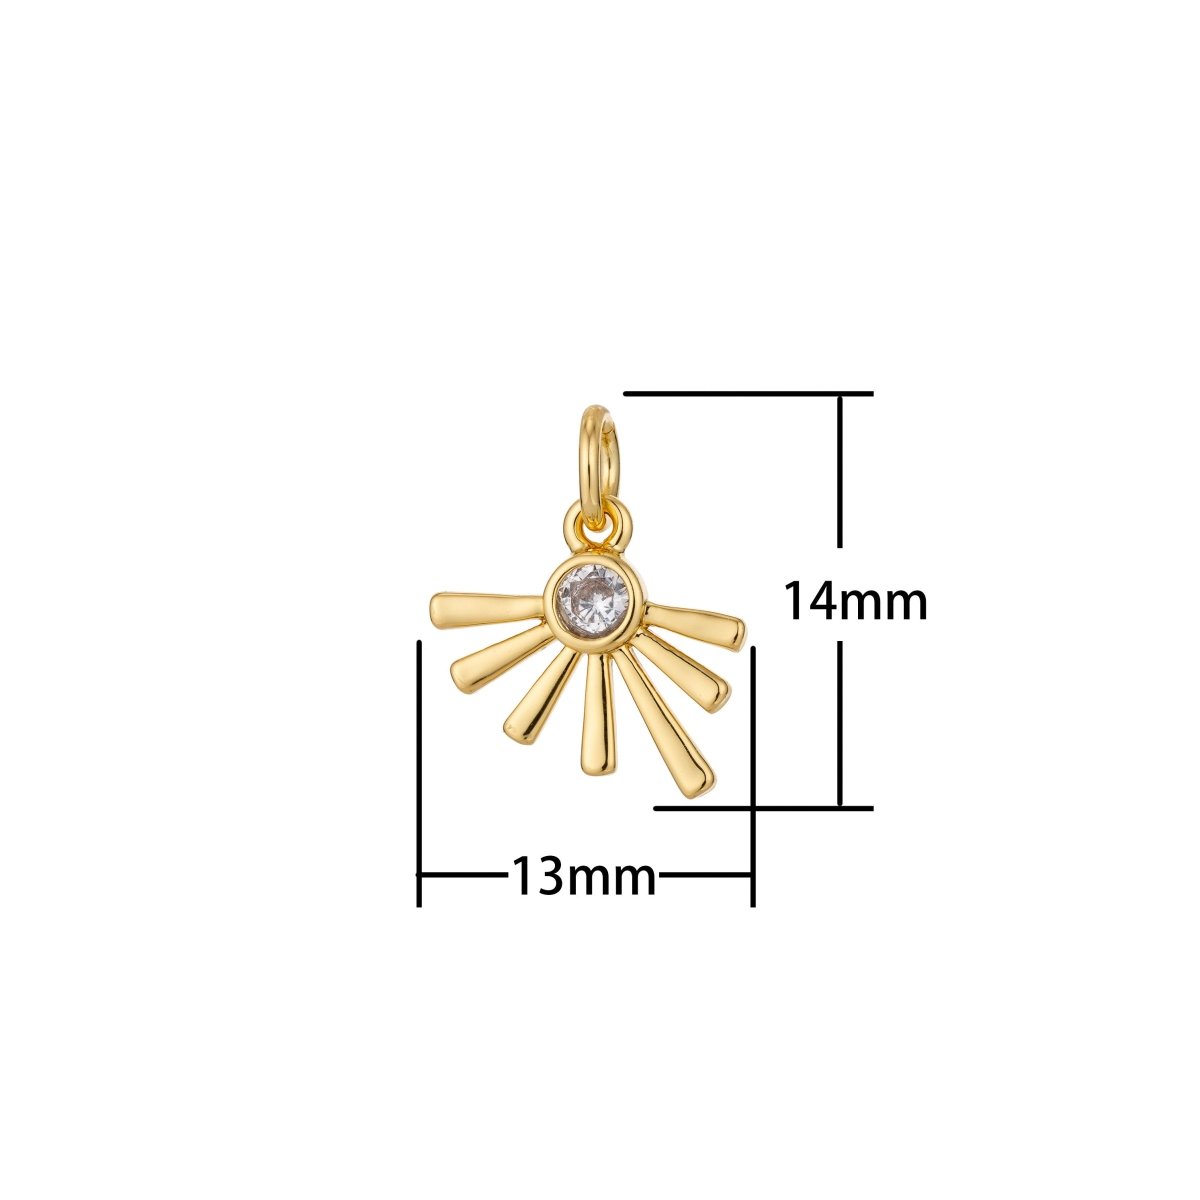 Dainty Bezel Set CZ Charm gold filled set with cubic zirconia accent Bohemian Sun Boho 14mm x 13mm for Necklace Earring Jewelry making C-321 - DLUXCA